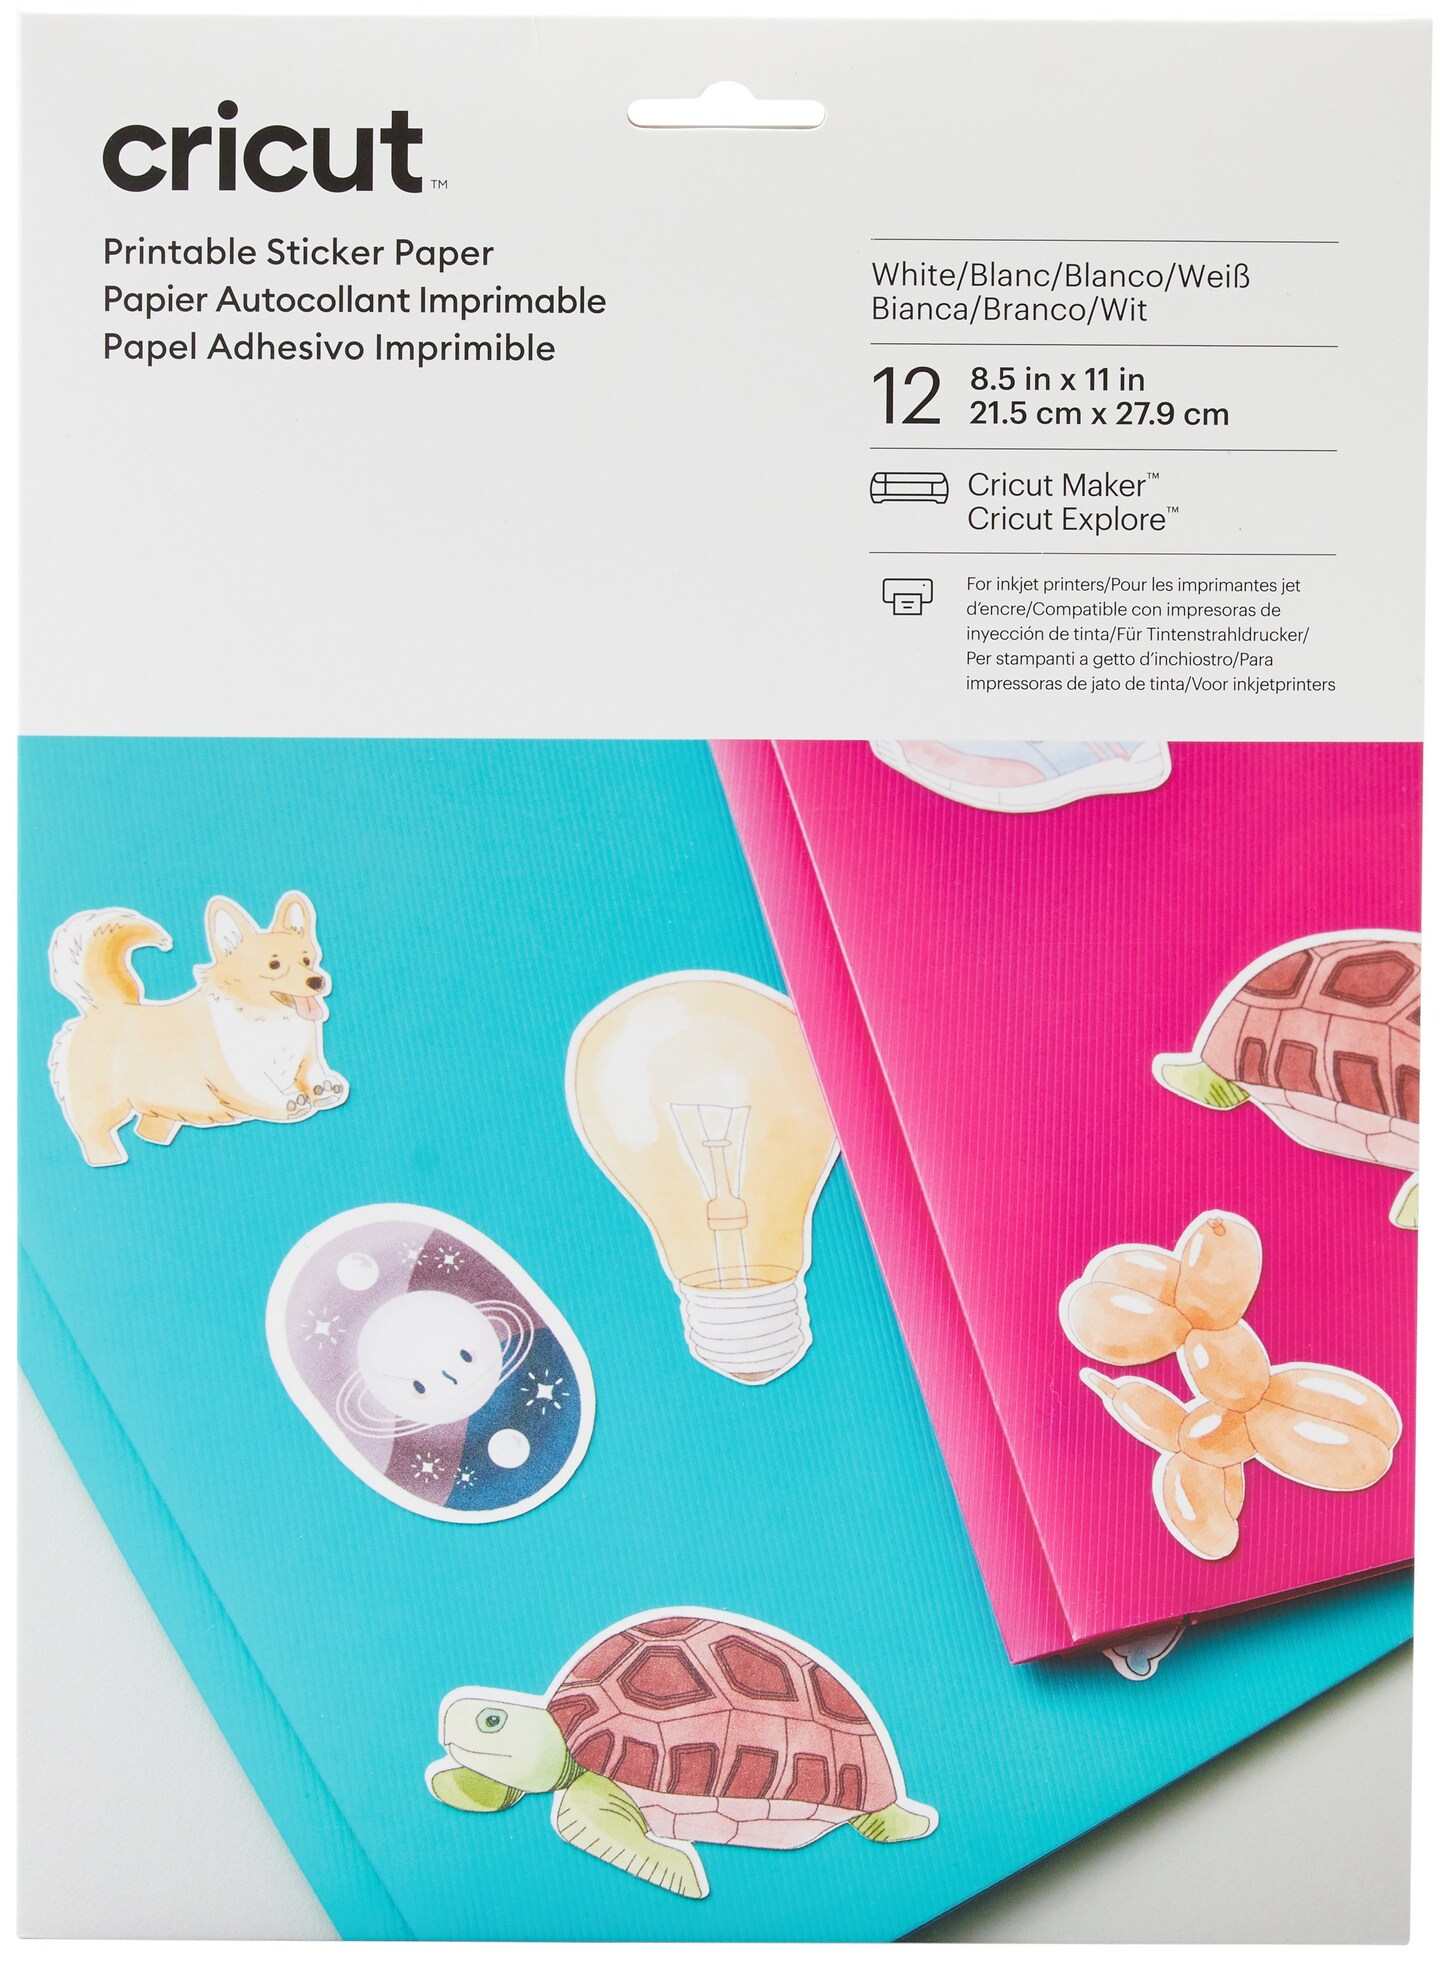 Cricut Printable Sticker Paper - 3 Packs of 12 Sheets Each - 36 Total Sheets